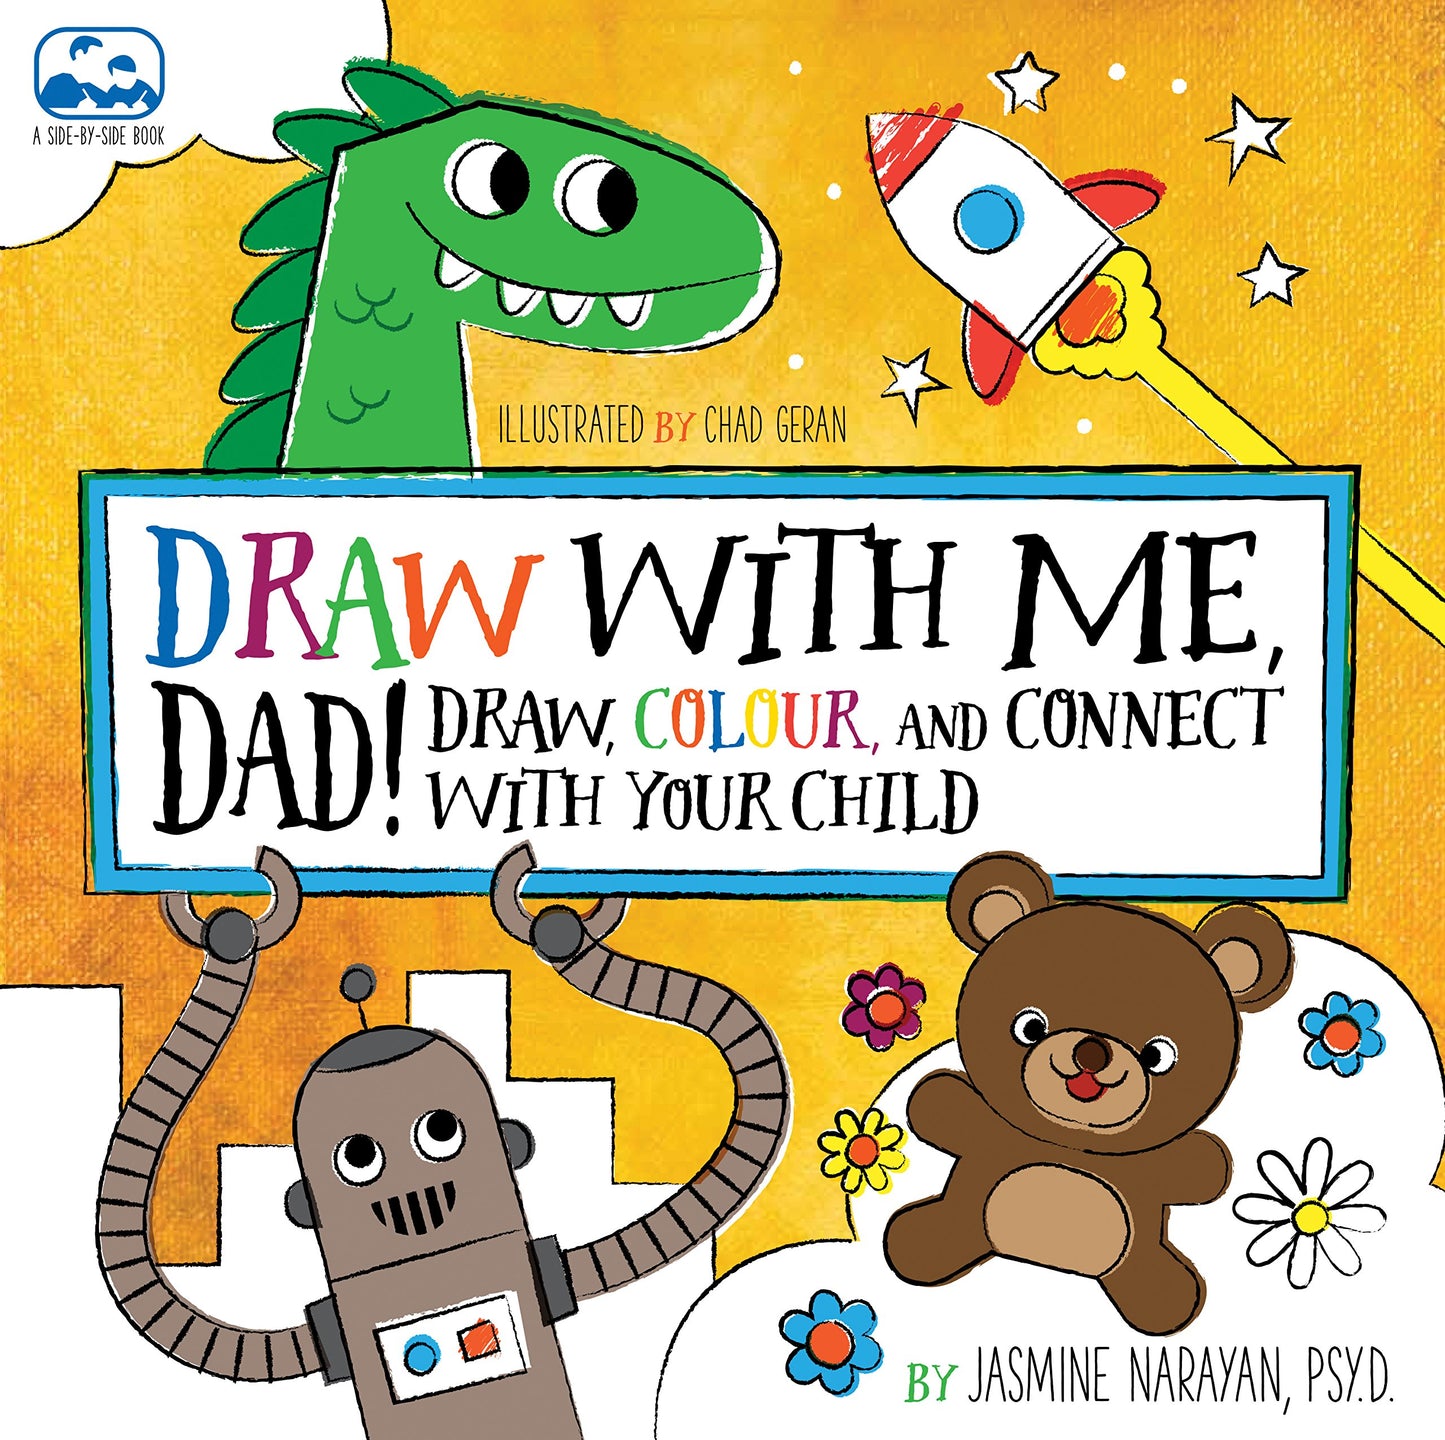 Draw with me Dad!